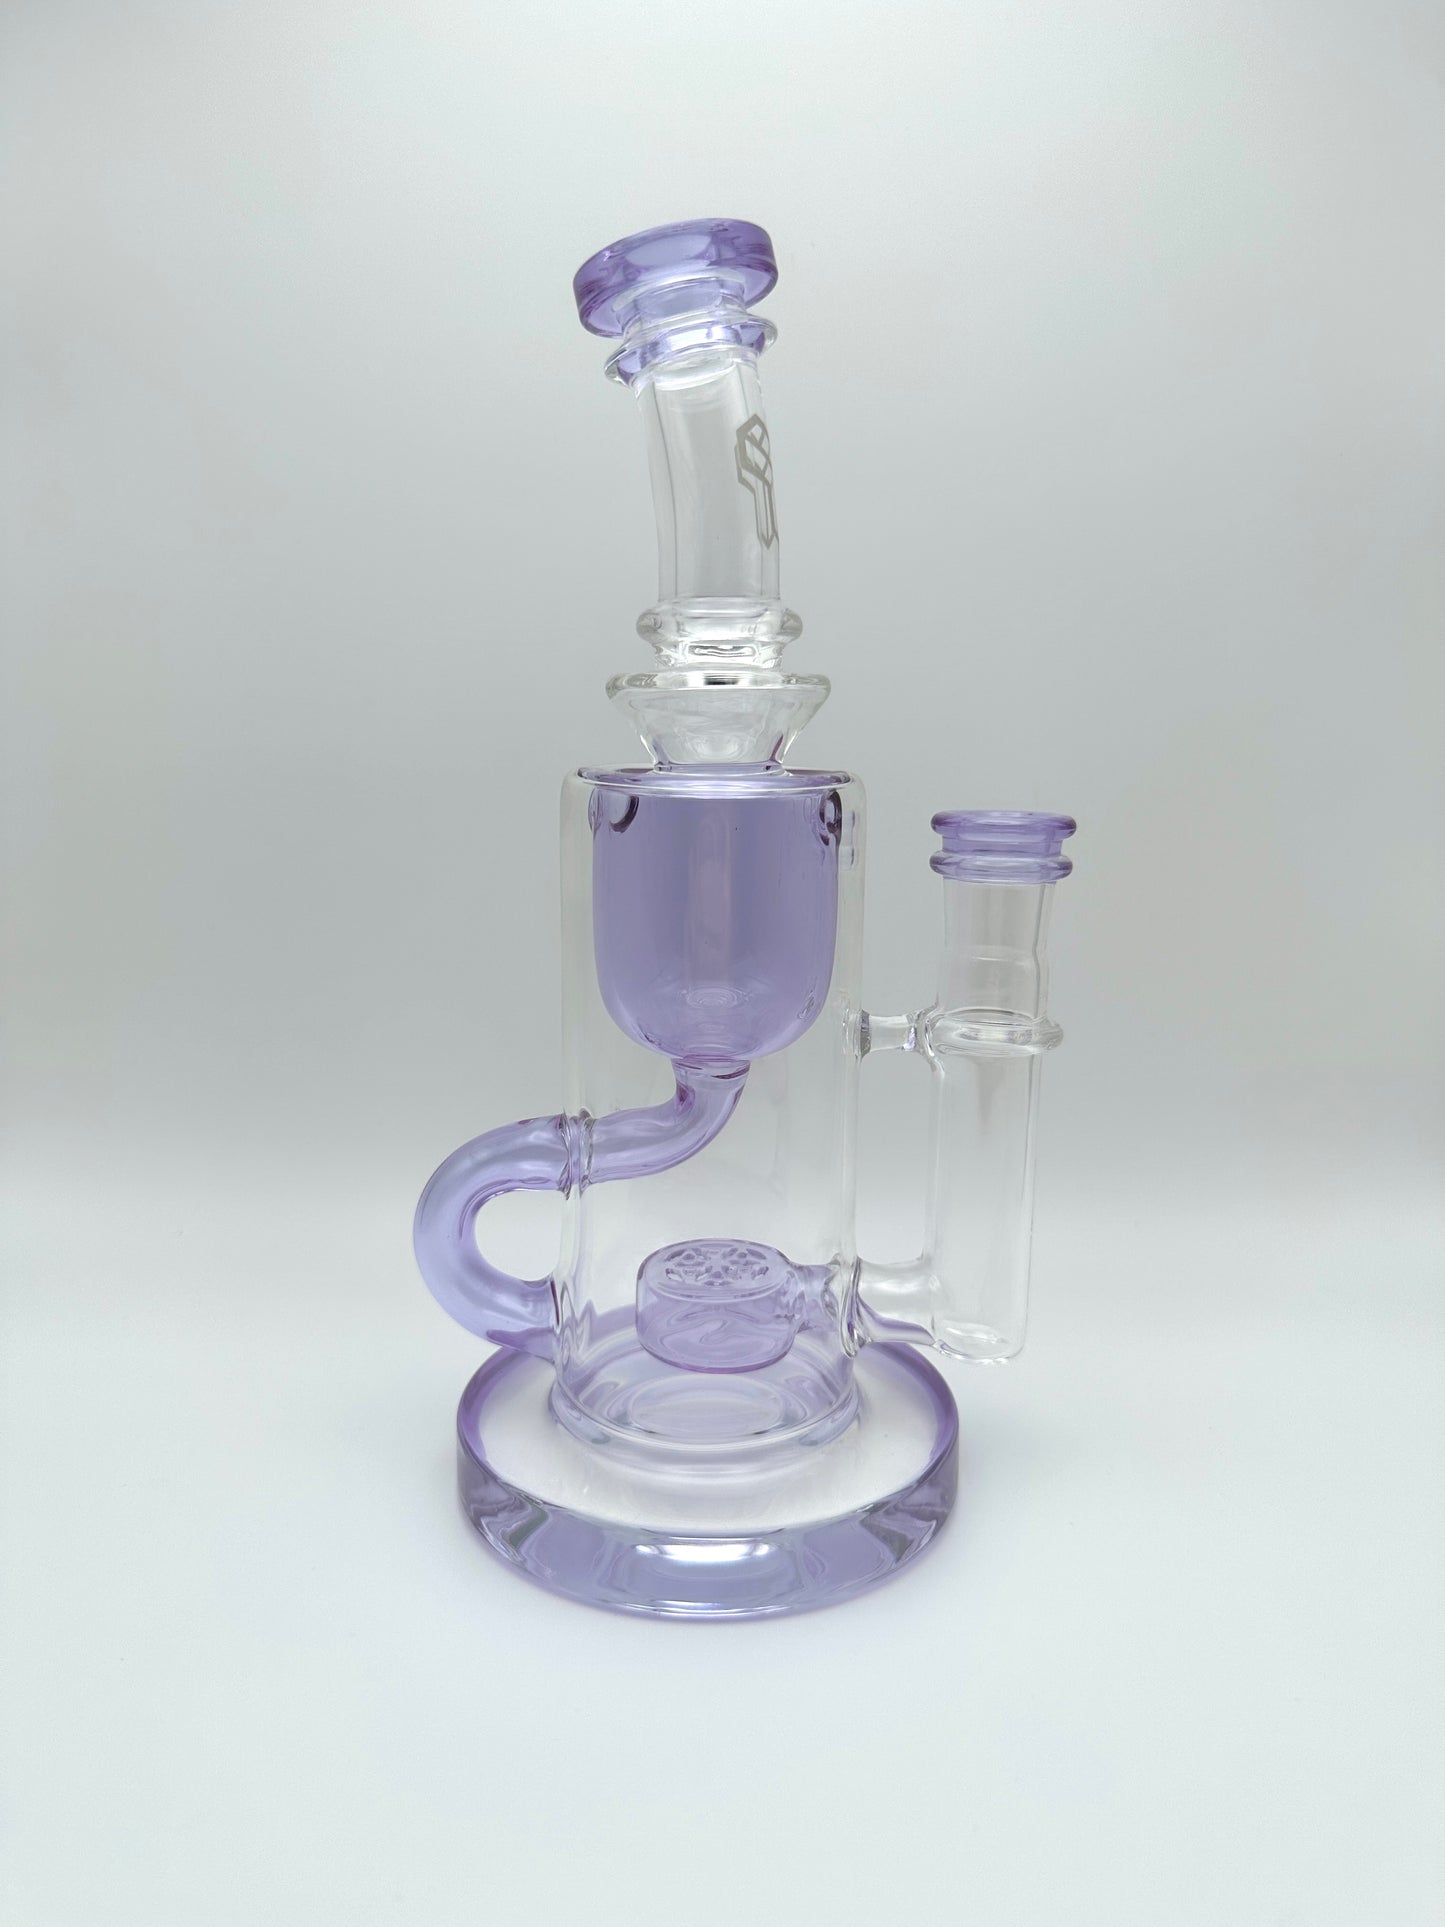 Incycler rig